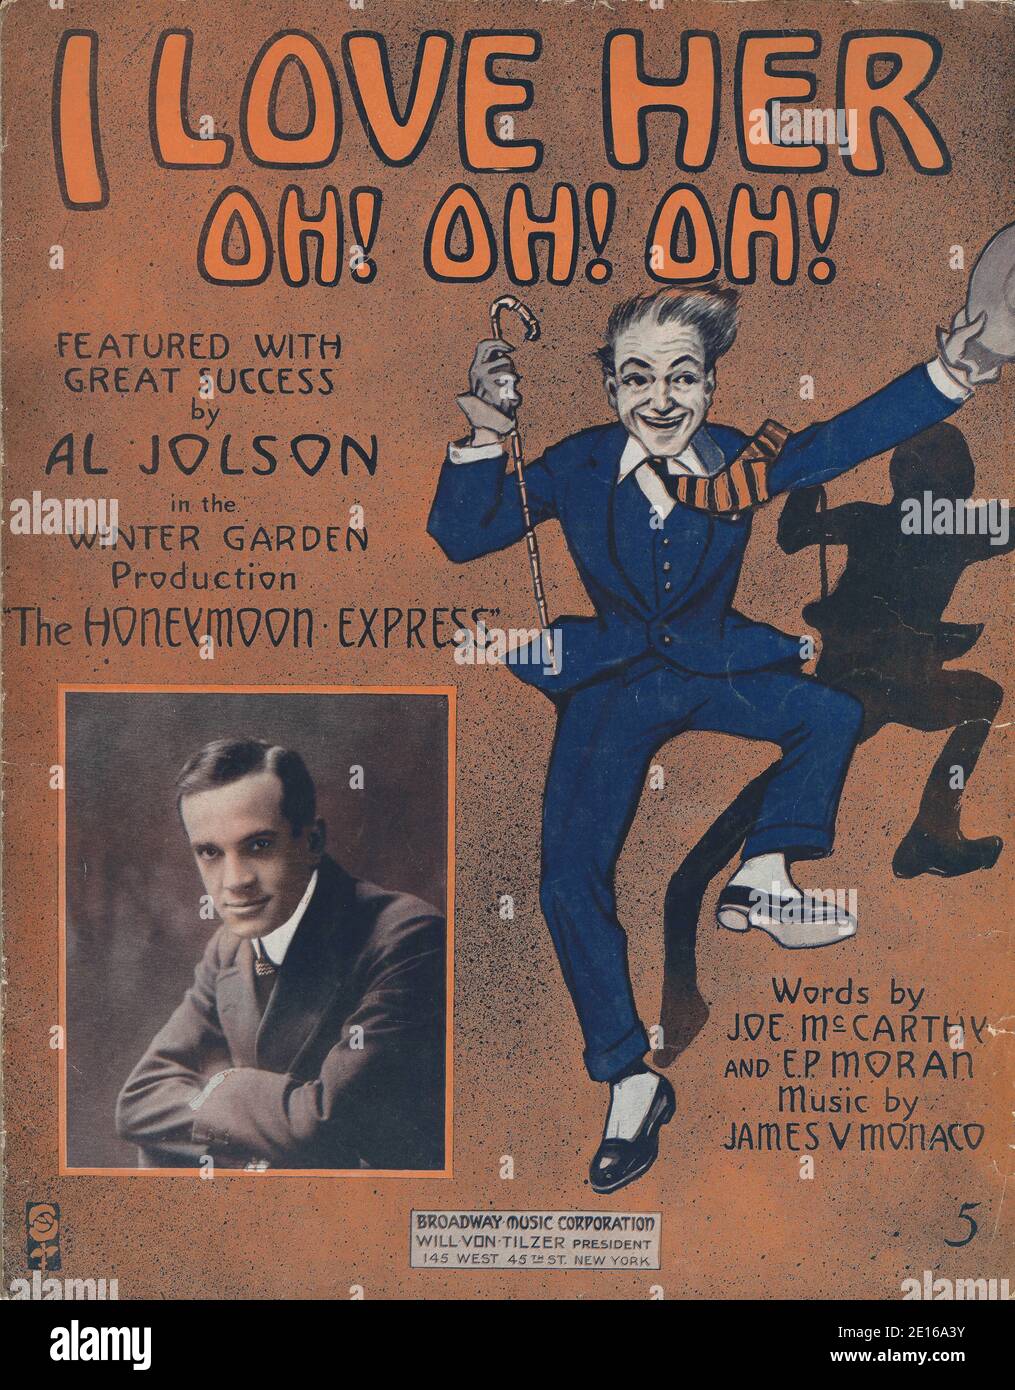 Al Jolson Song 'I Love Her, Oh! Oh! Oh!' from 'The Honeymoon Express' 1913 Musical Sheet Music Cover Stock Photo